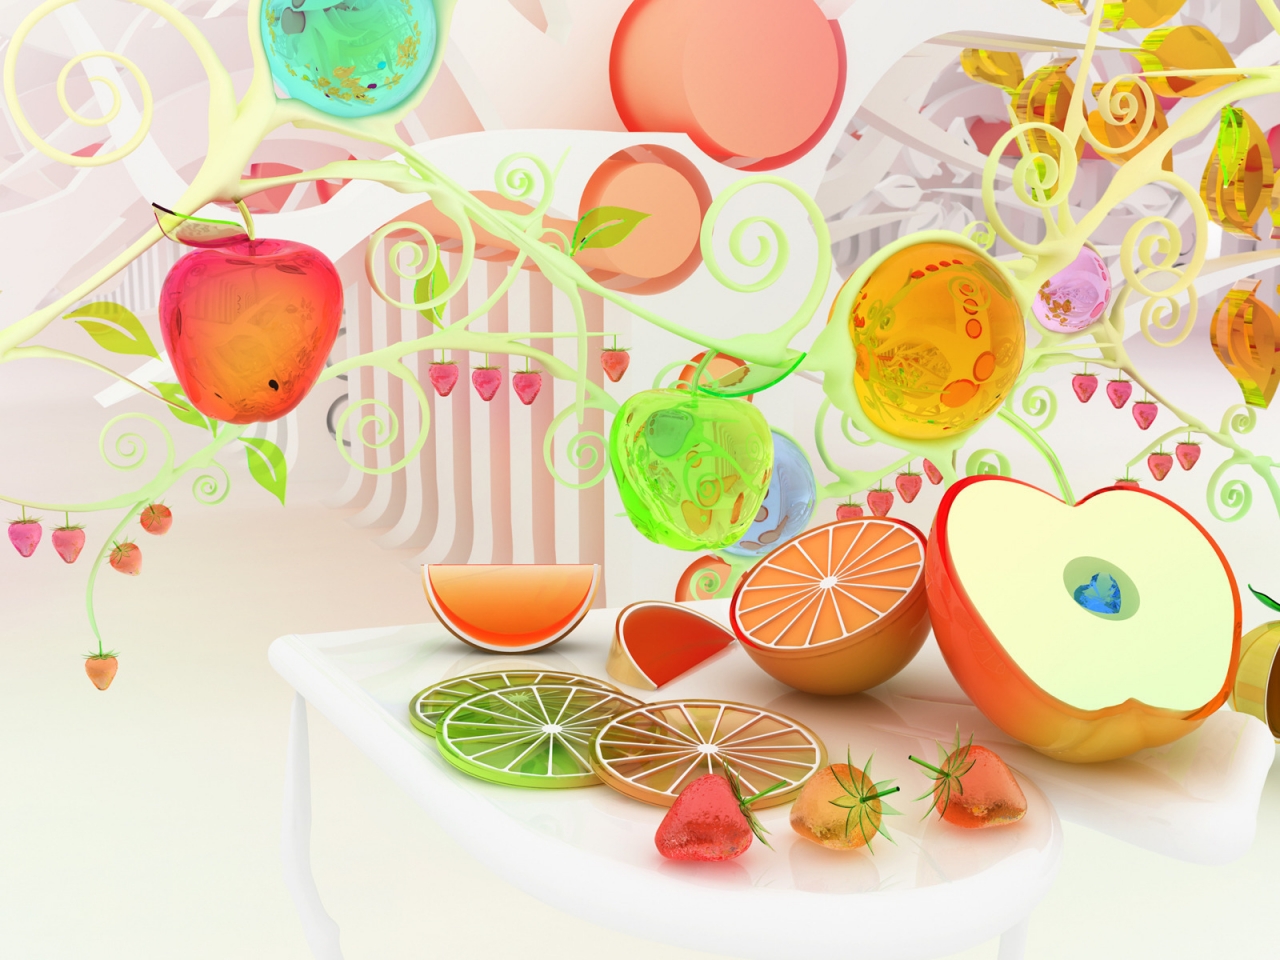 Fruits for 1280 x 960 resolution